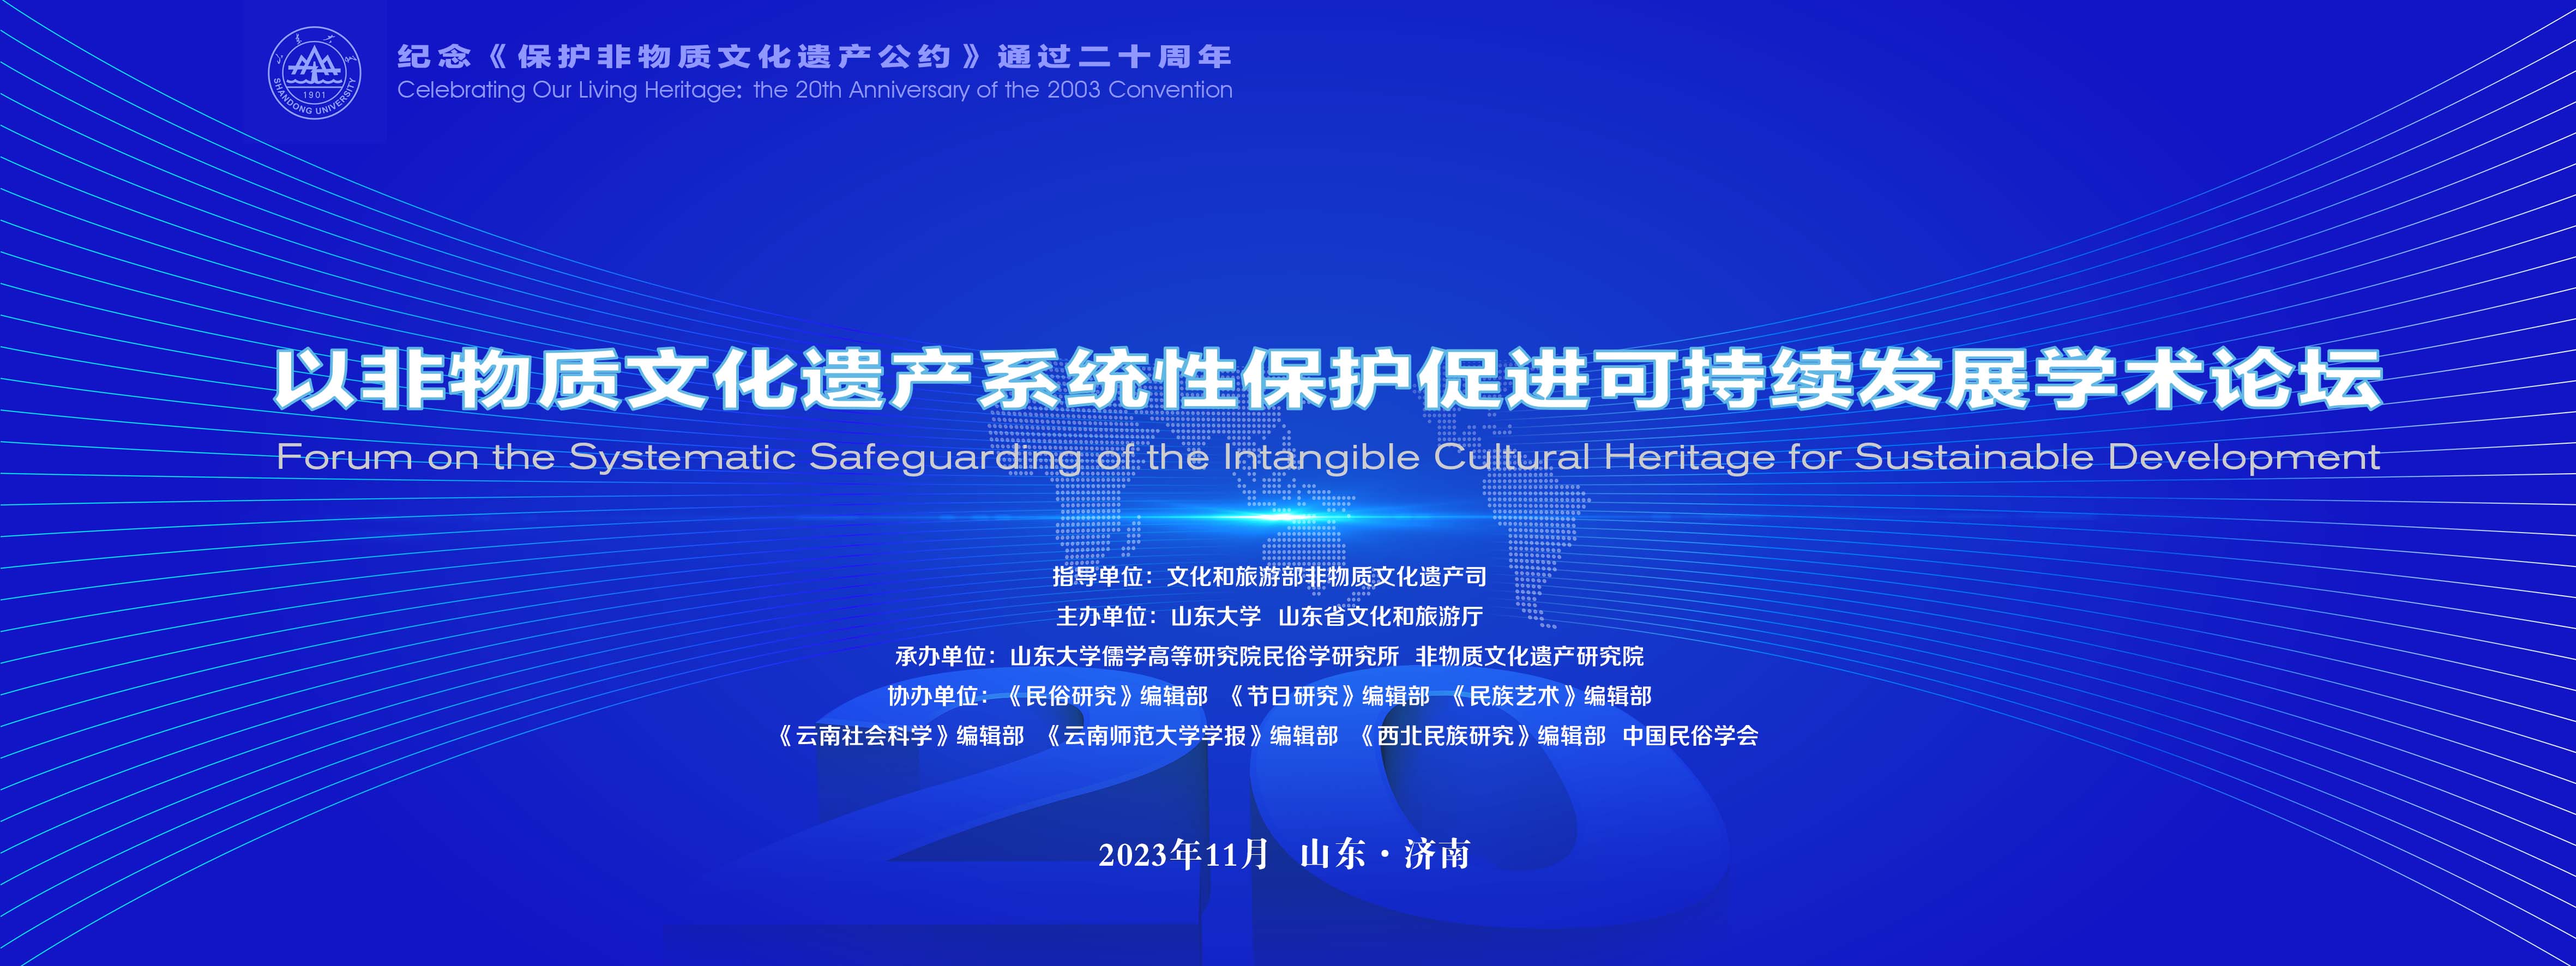 Forum on the Systematic Safeguarding of the Intangible Cultural Heritage for Sustainable Development